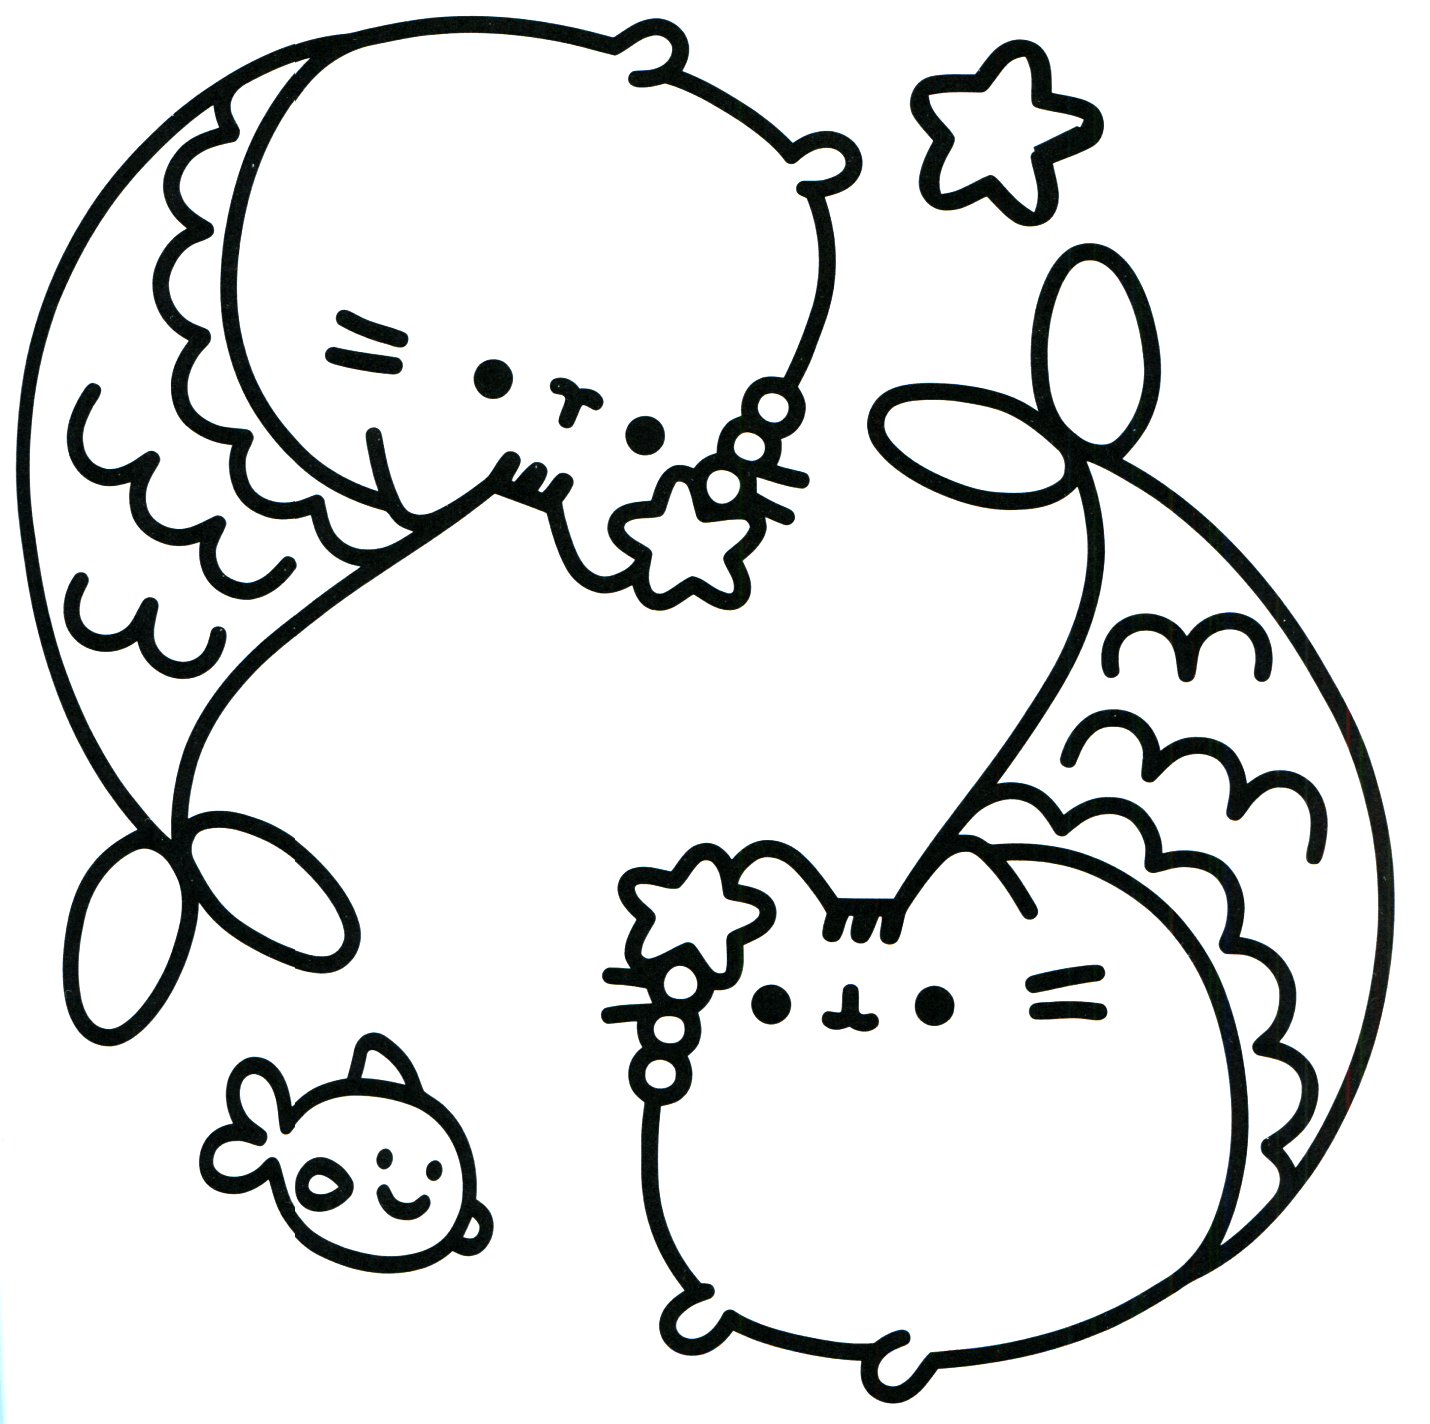 Two cat mermaid Coloring Page